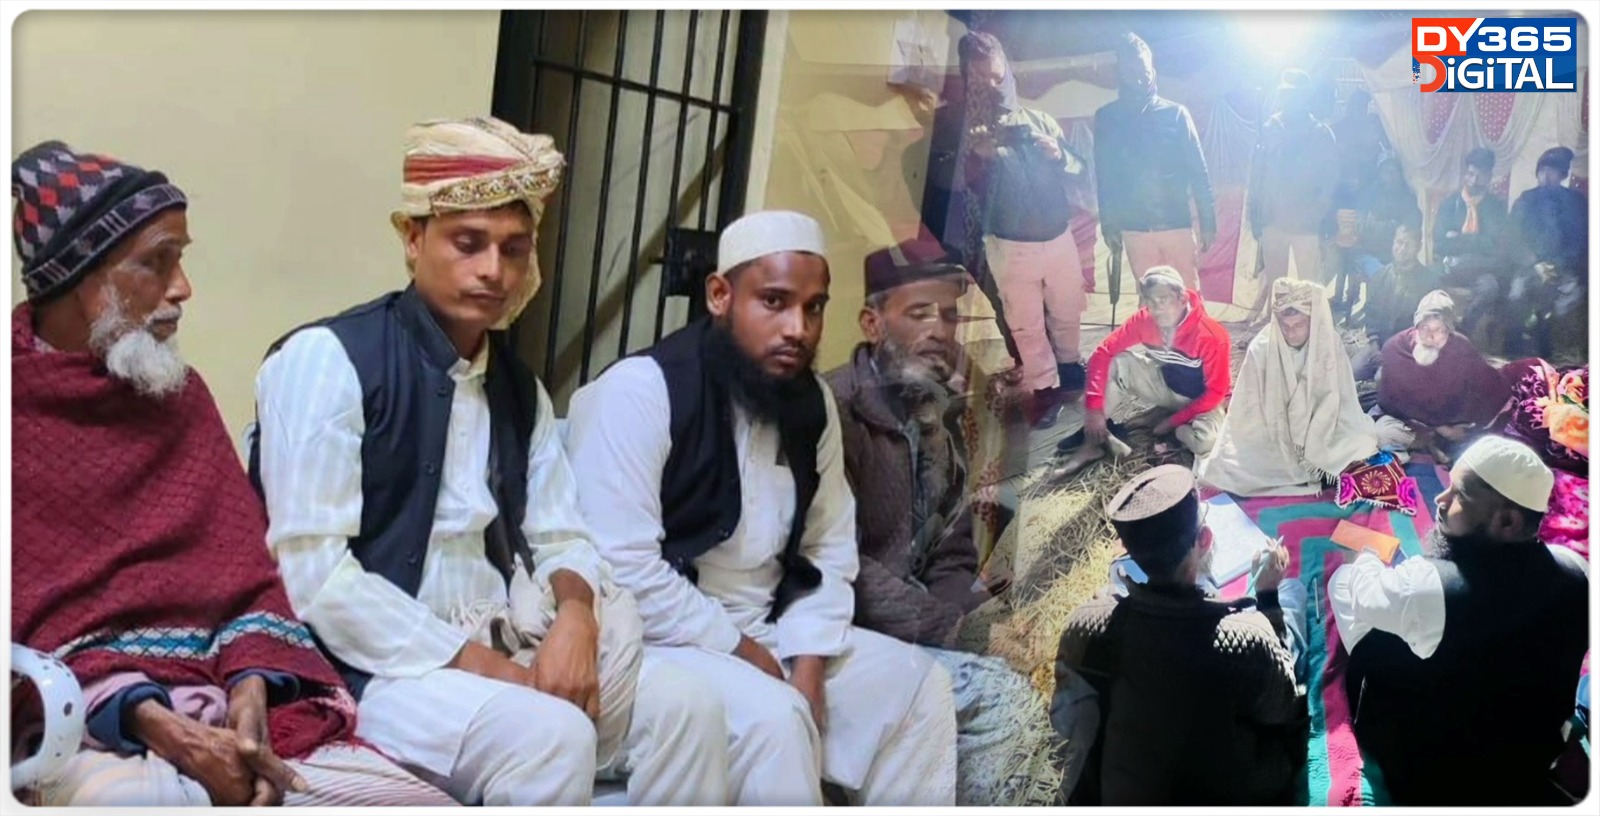 six-including-bride-detained-in-connection-to-child-marriage-related-case